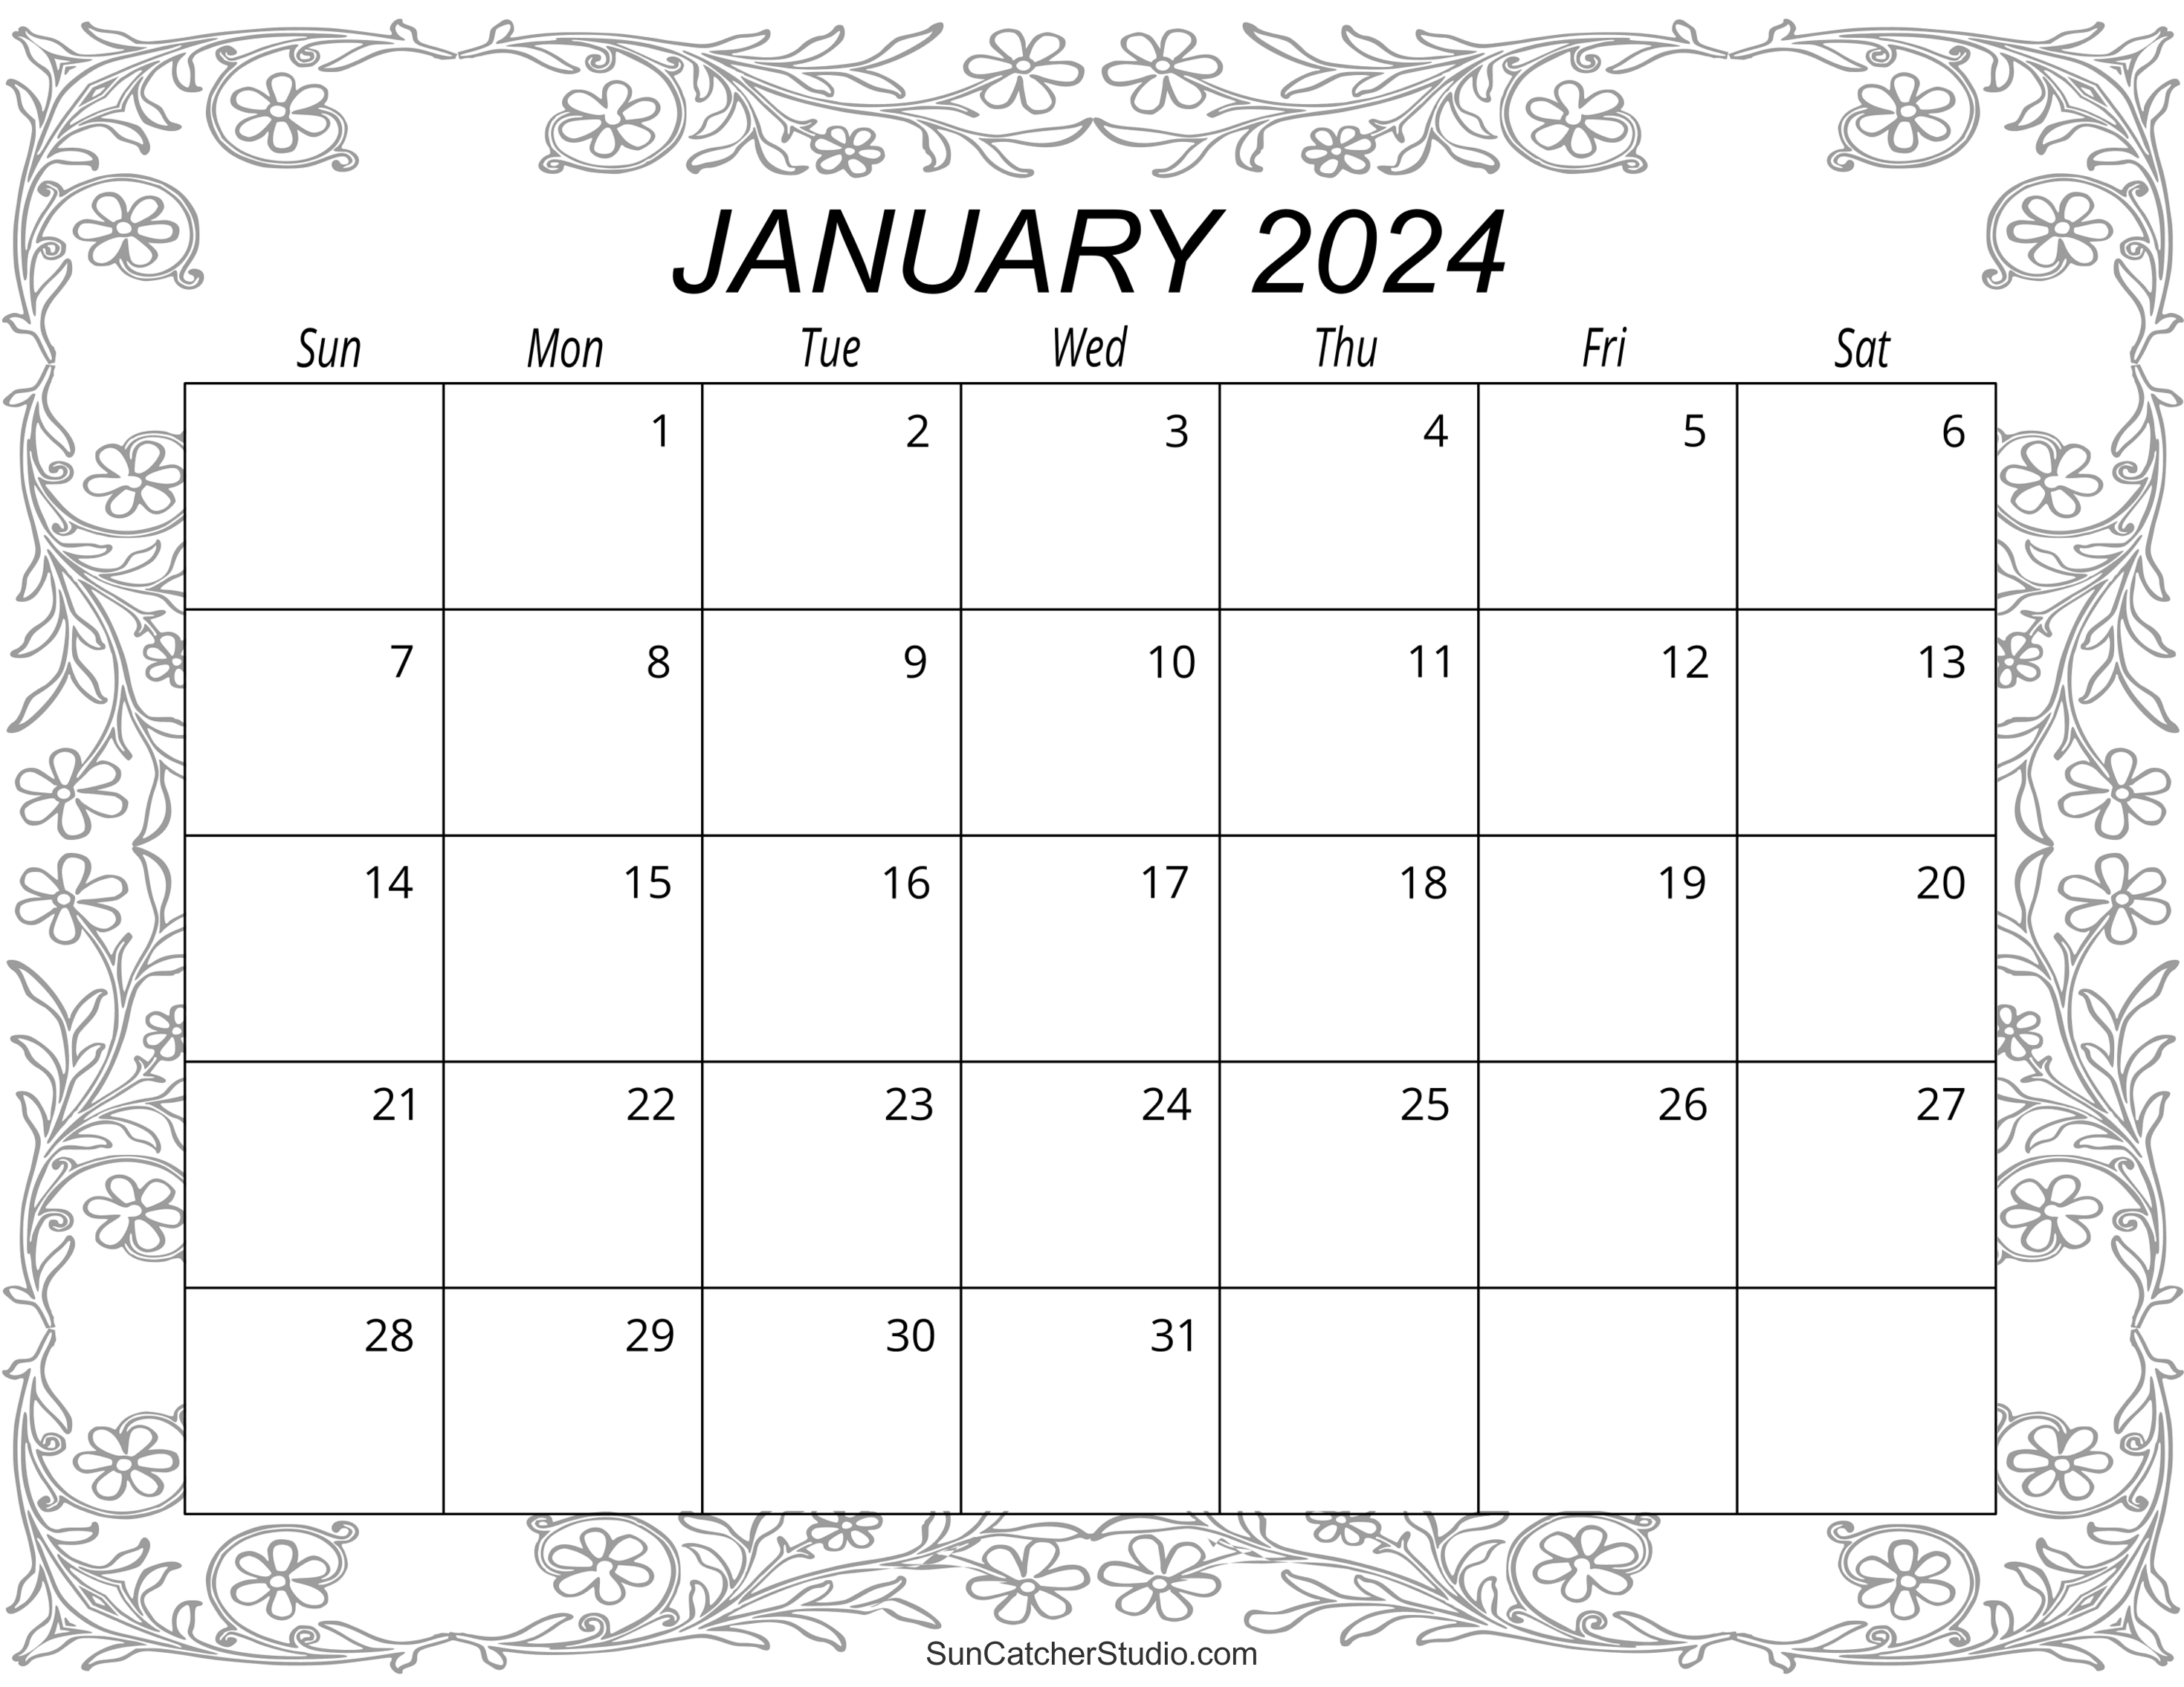 January 2024 Calendar (Free Printable) DIY Projects, Patterns